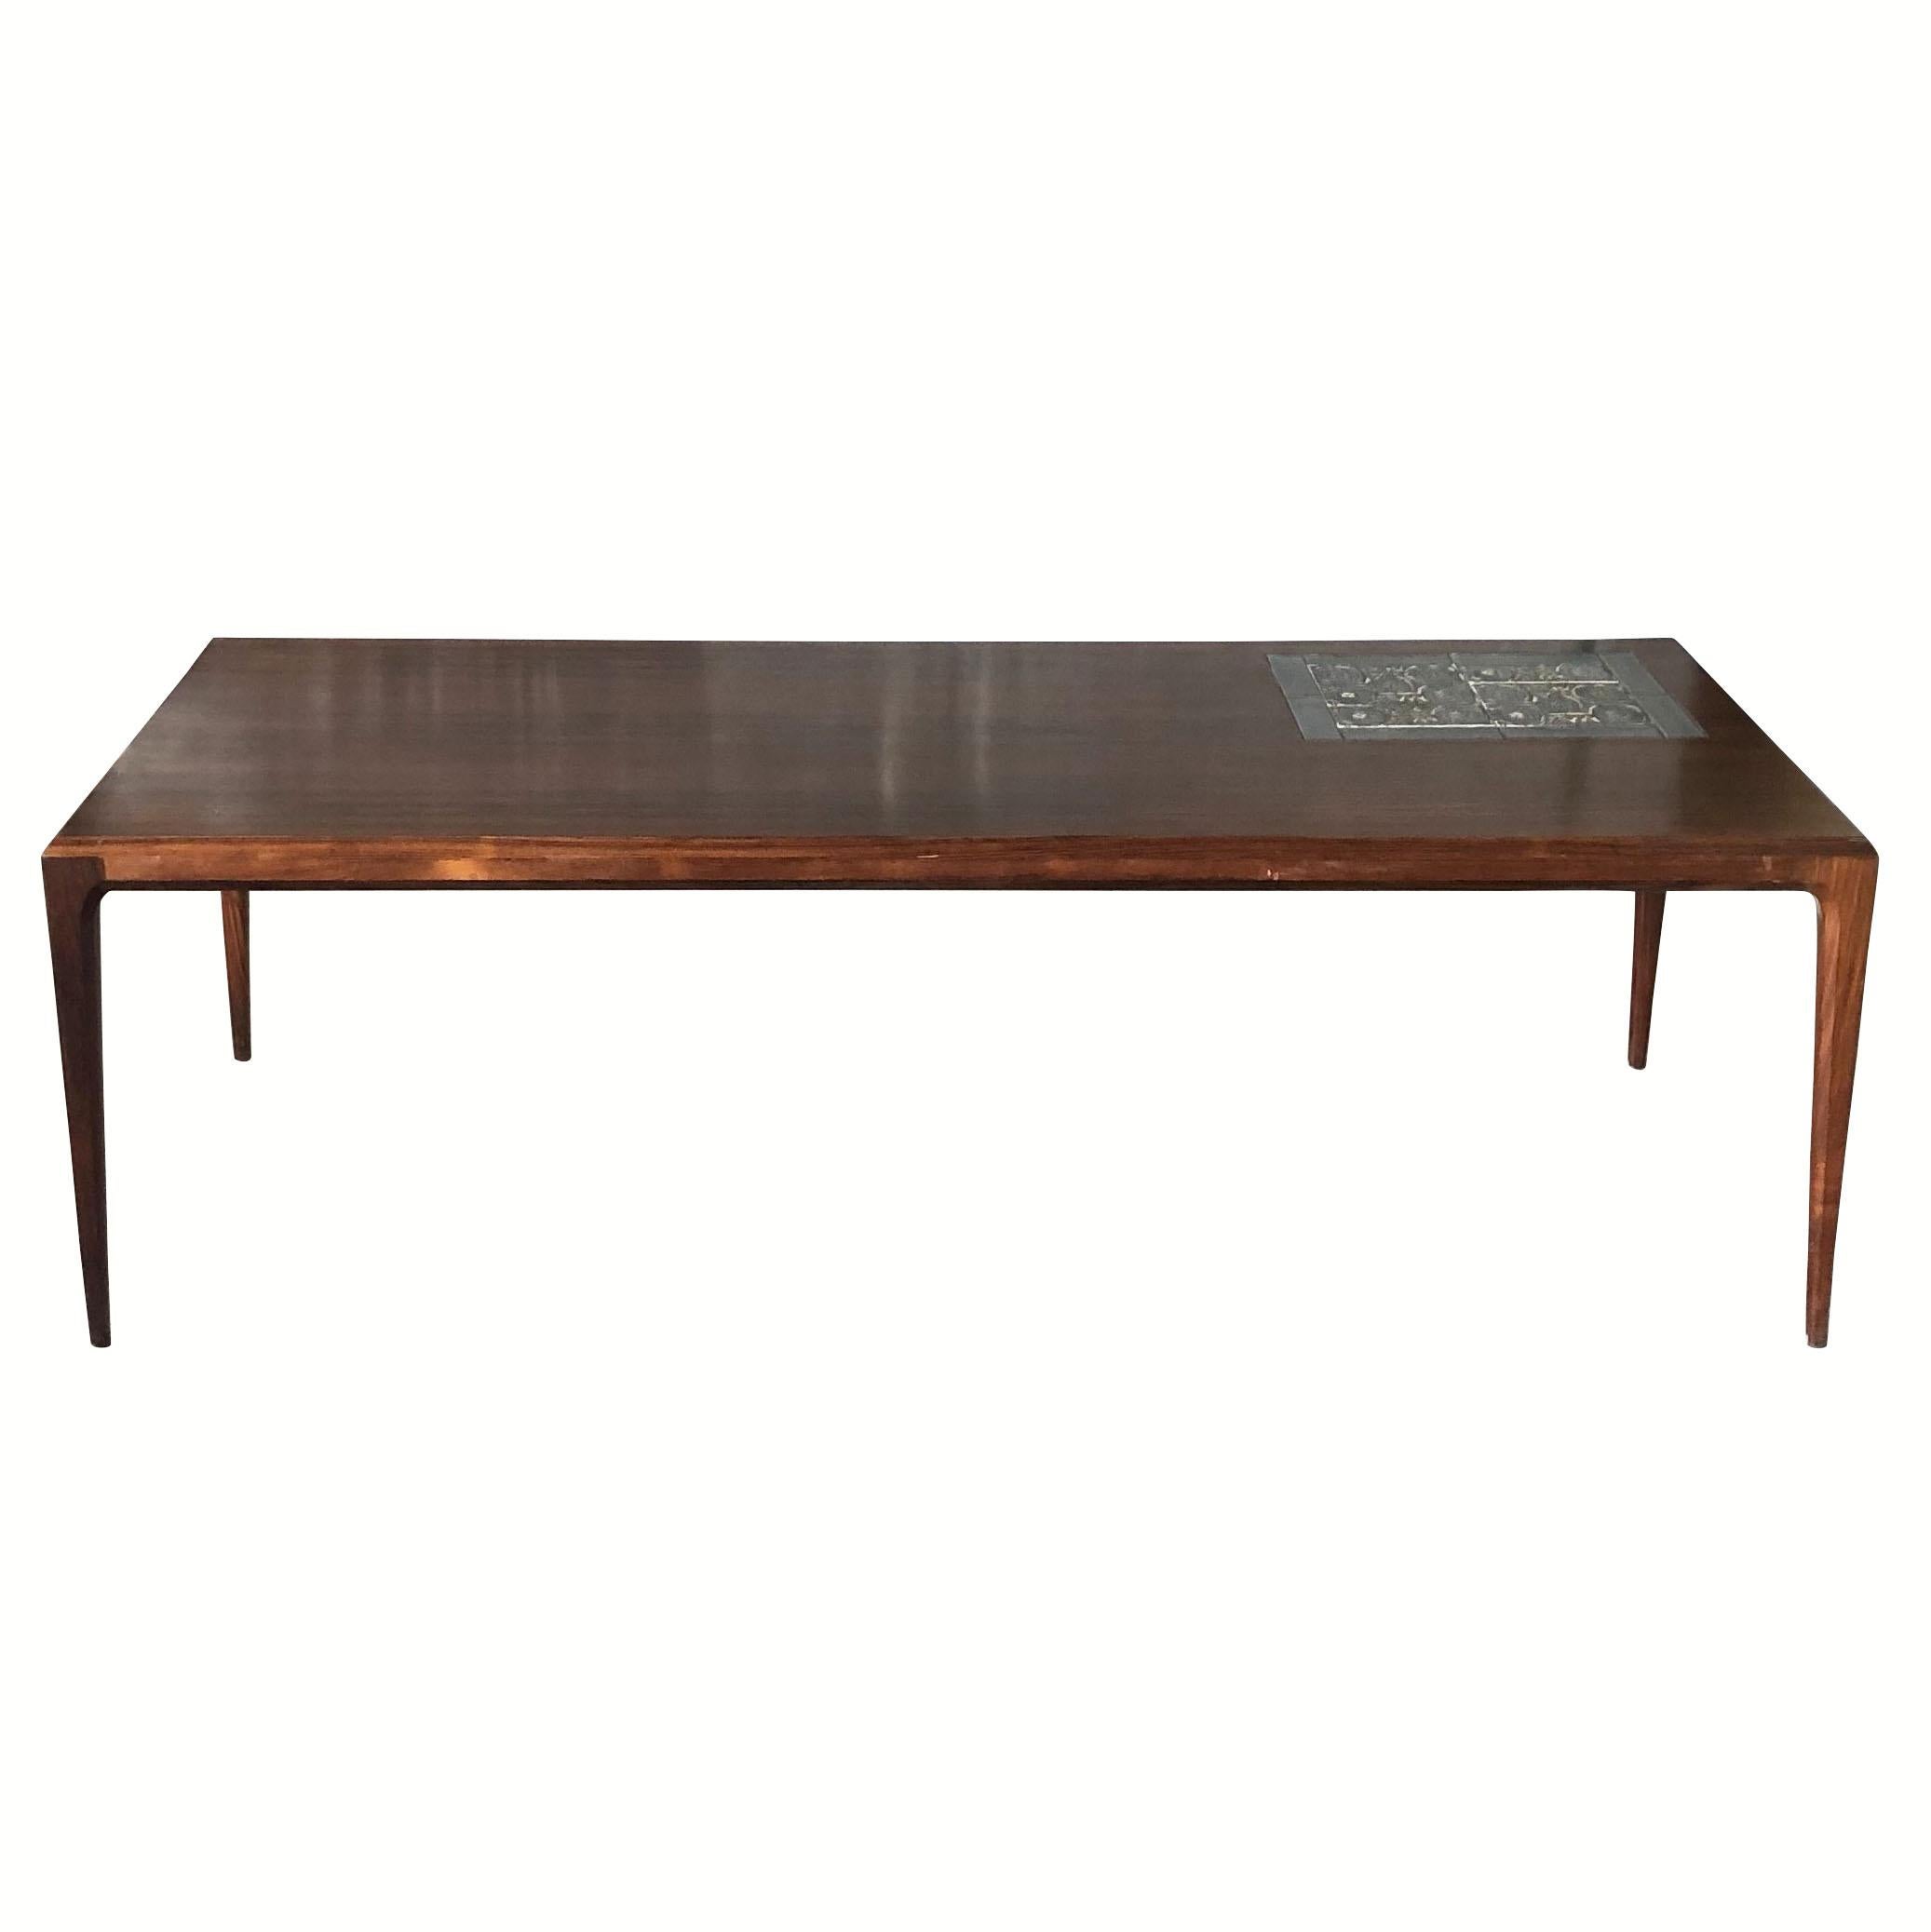 A vintage Mid-Century Modern Danish low sofa table or coffee table in restored Rosewood, in good condition. Designed by Severin Hansen Jr. with a lateral tile insert and blue tile surround by Nils Thorsson, Royal Copenhagen. Wear consistent with age